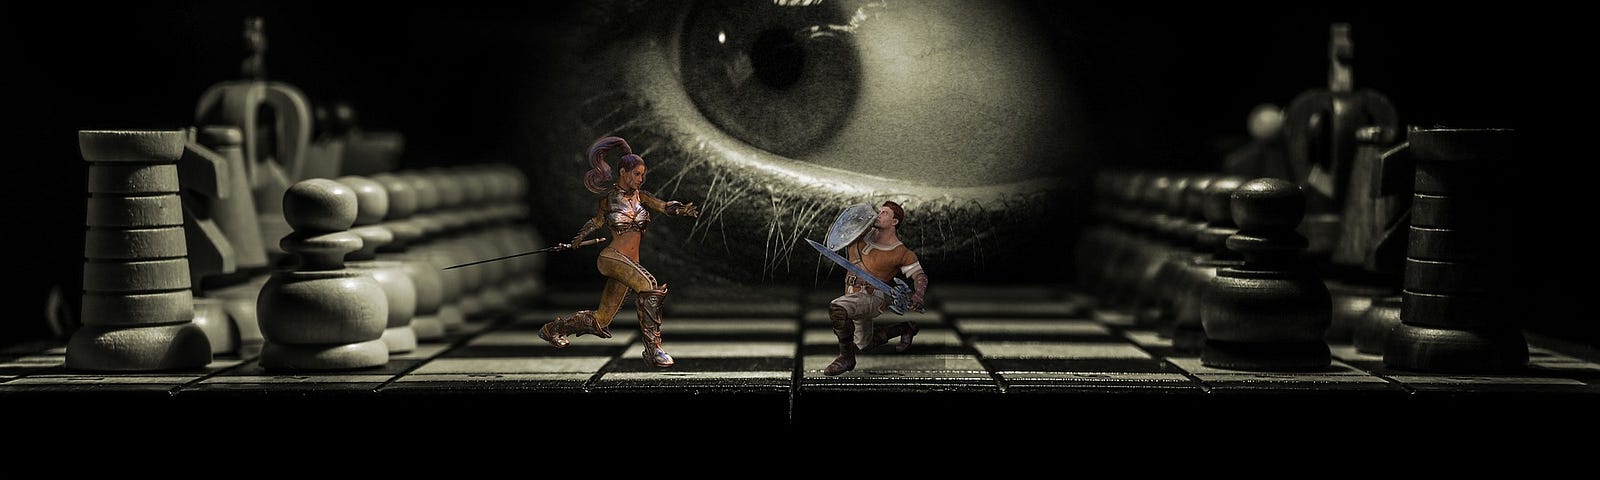 Fantasy figures fighting on a chess board. Giant eye in background